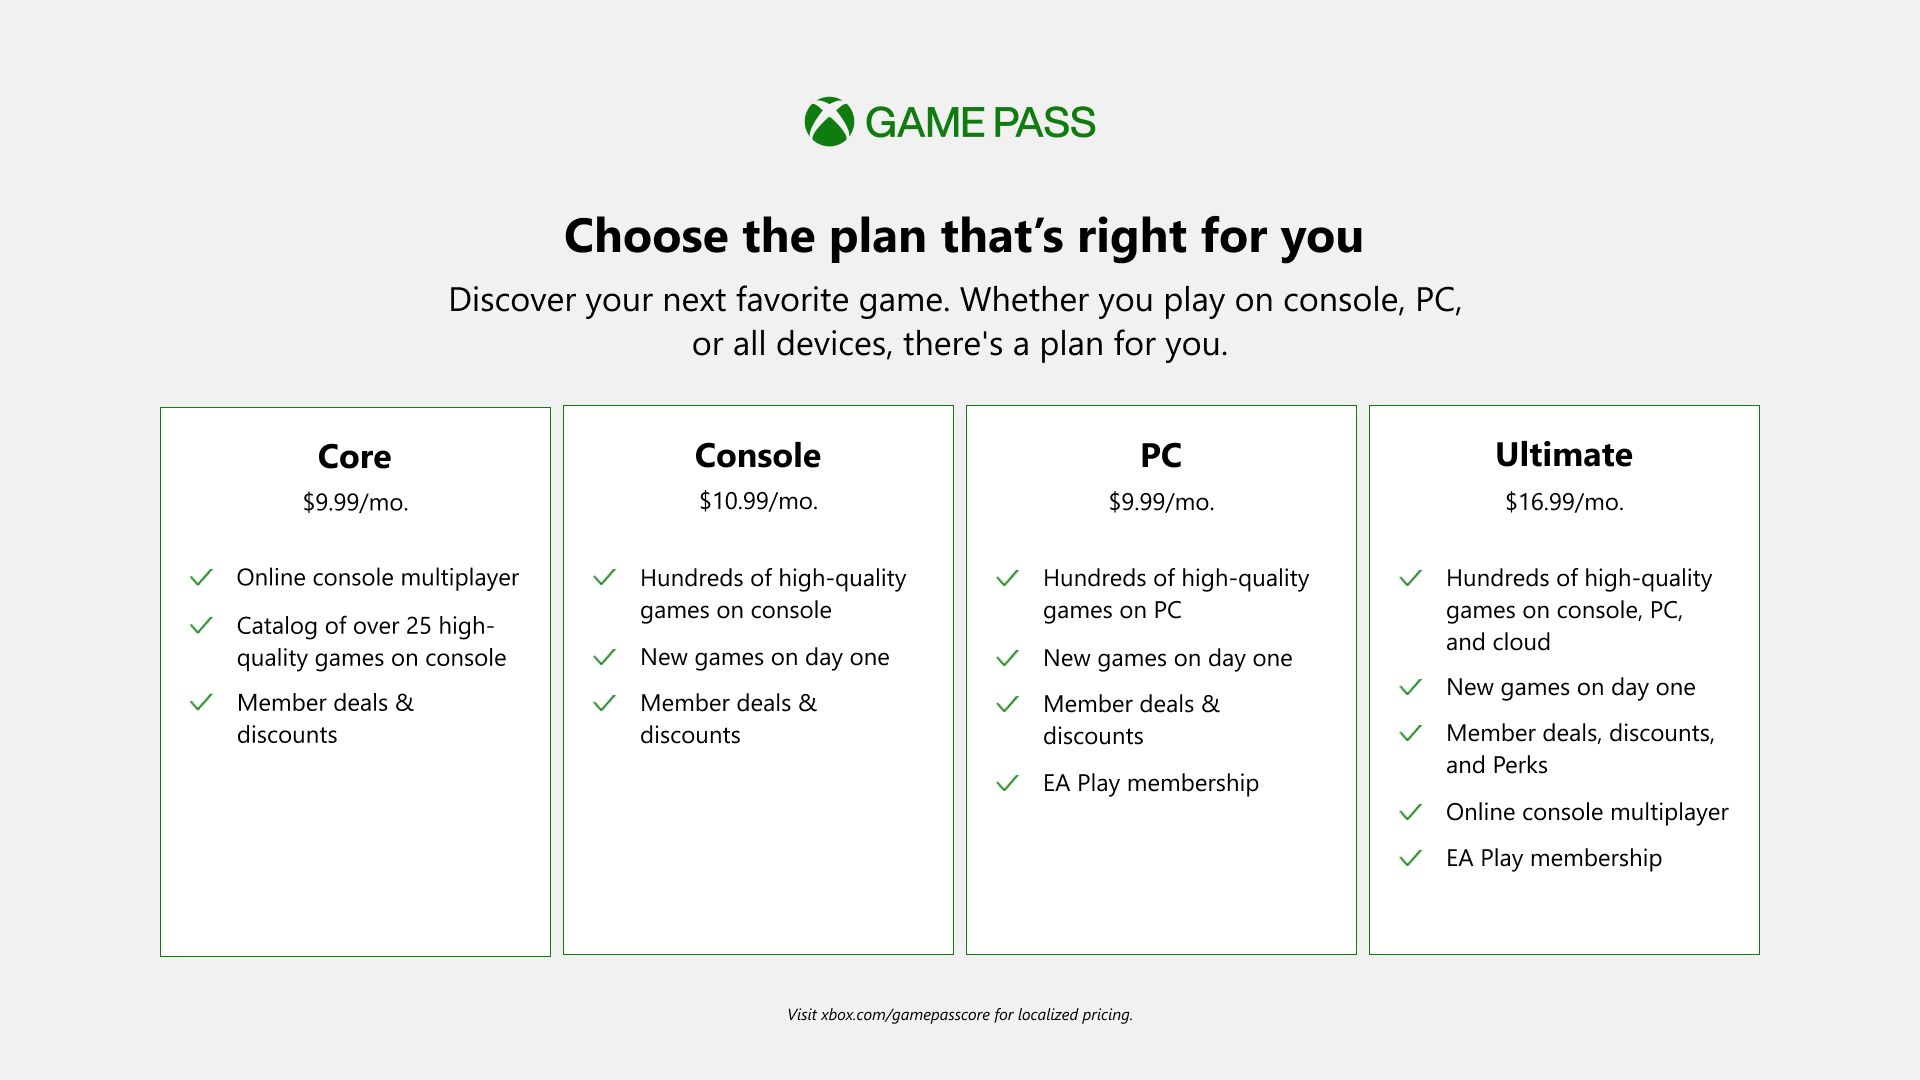 Invite Your Friends and Play Together - Announcing Game Pass' New Friend  Referral Program - Xbox Wire